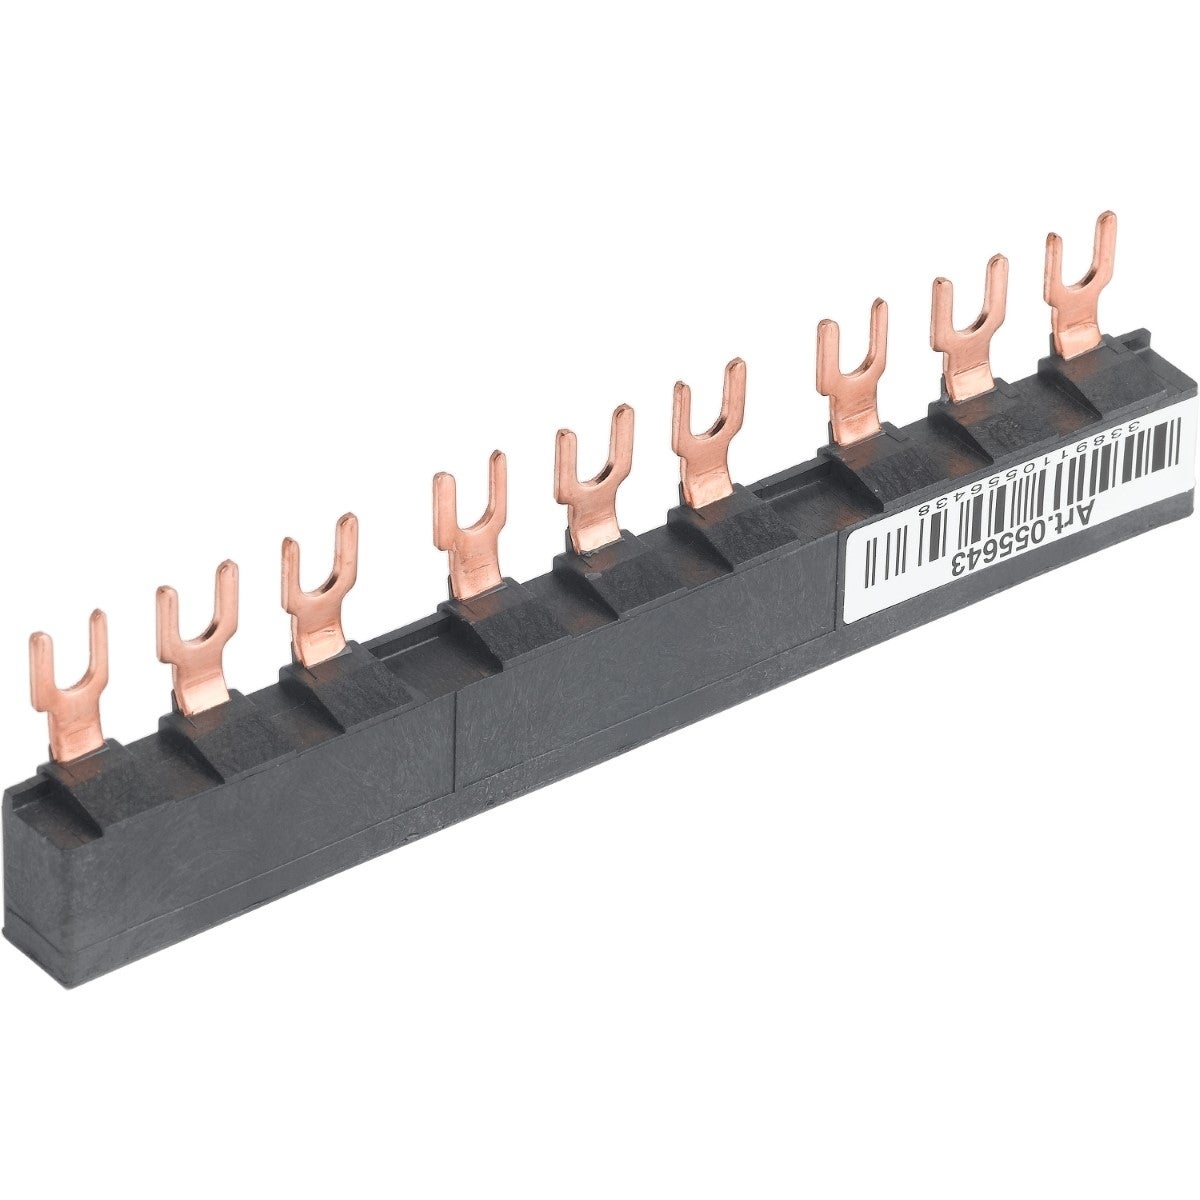 Linergy FT, Comb busbar, 63A, 3 tap-offs, 45mm pitch